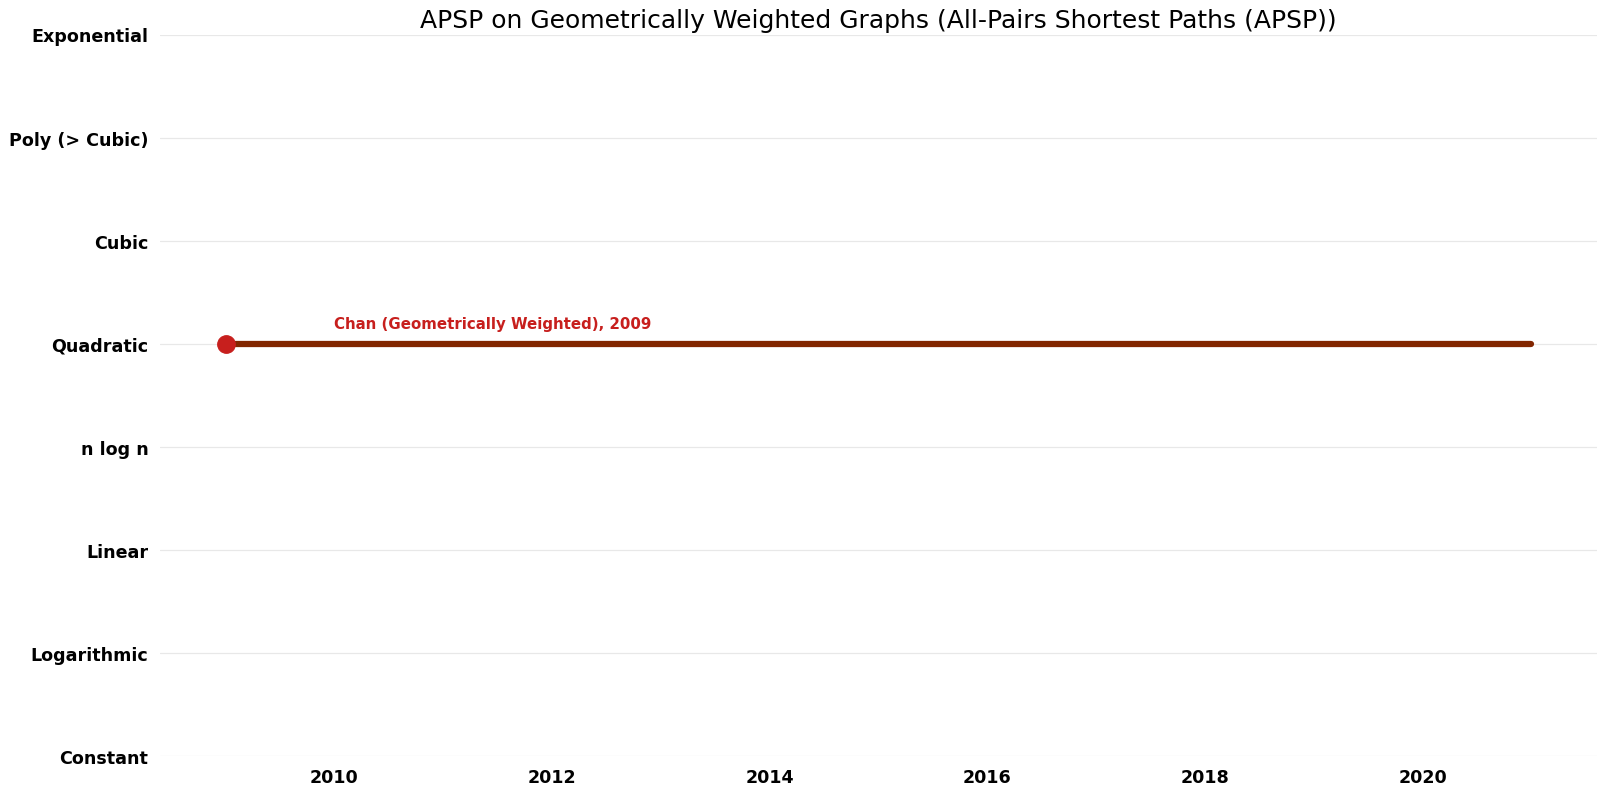 File:All-Pairs Shortest Paths (APSP) - APSP on Geometrically Weighted Graphs - Space.png